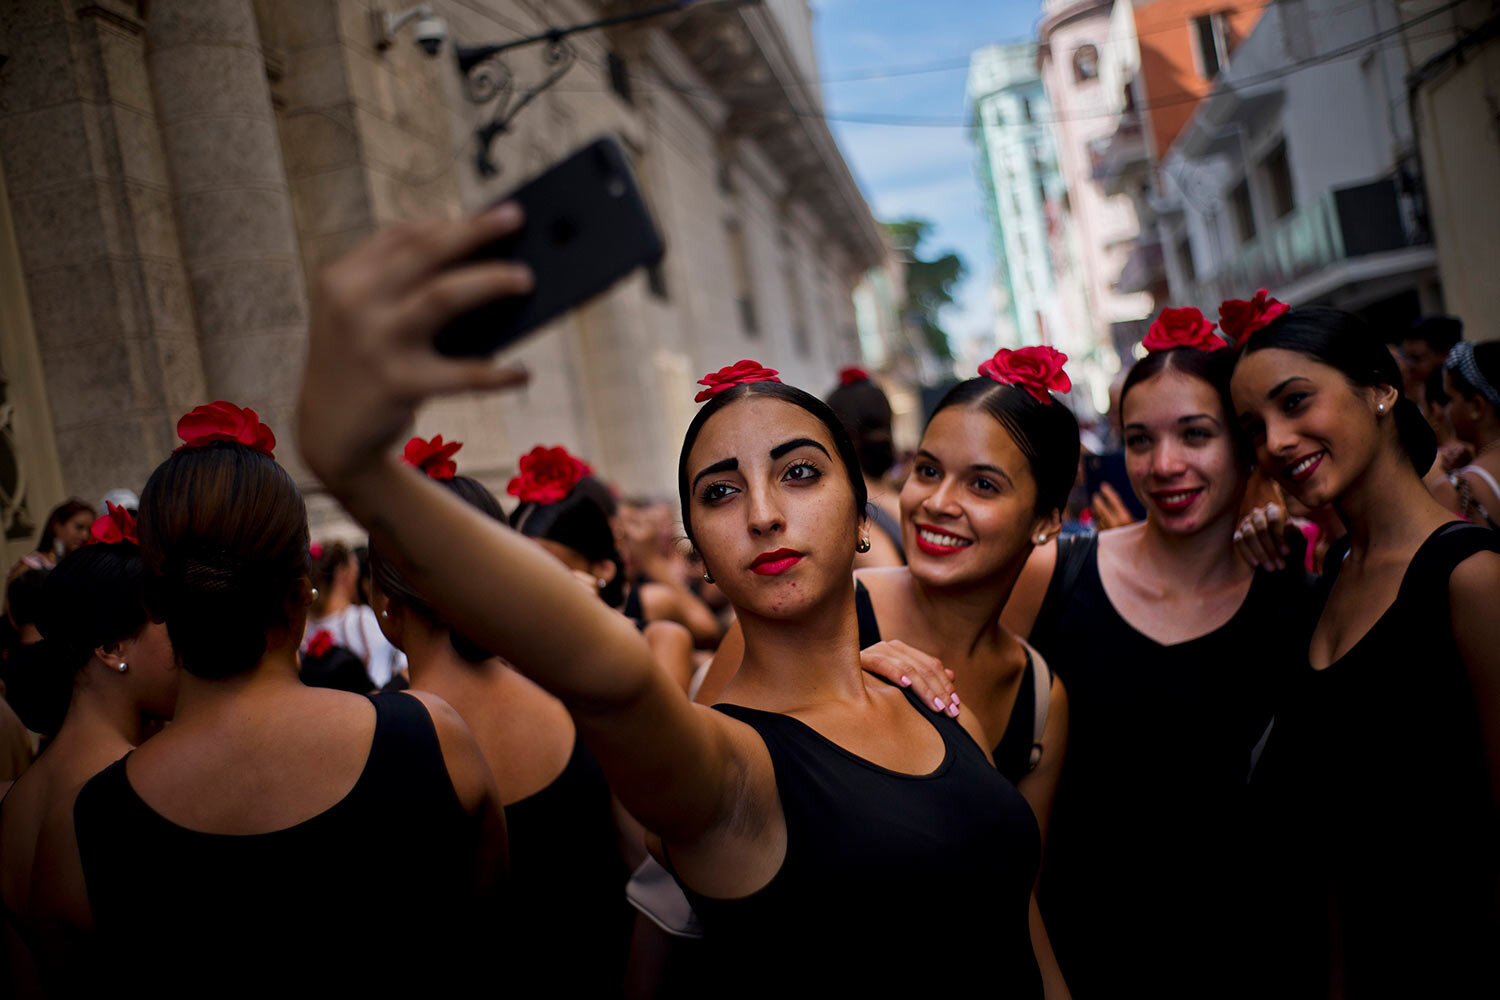  Young flamenco dancers take a selfie before performing in the street during the 26th International Ballet Festival in Havana, Cuba, Sunday, Nov. 4, 2018. (AP Photo/Ramon Espinosa) 